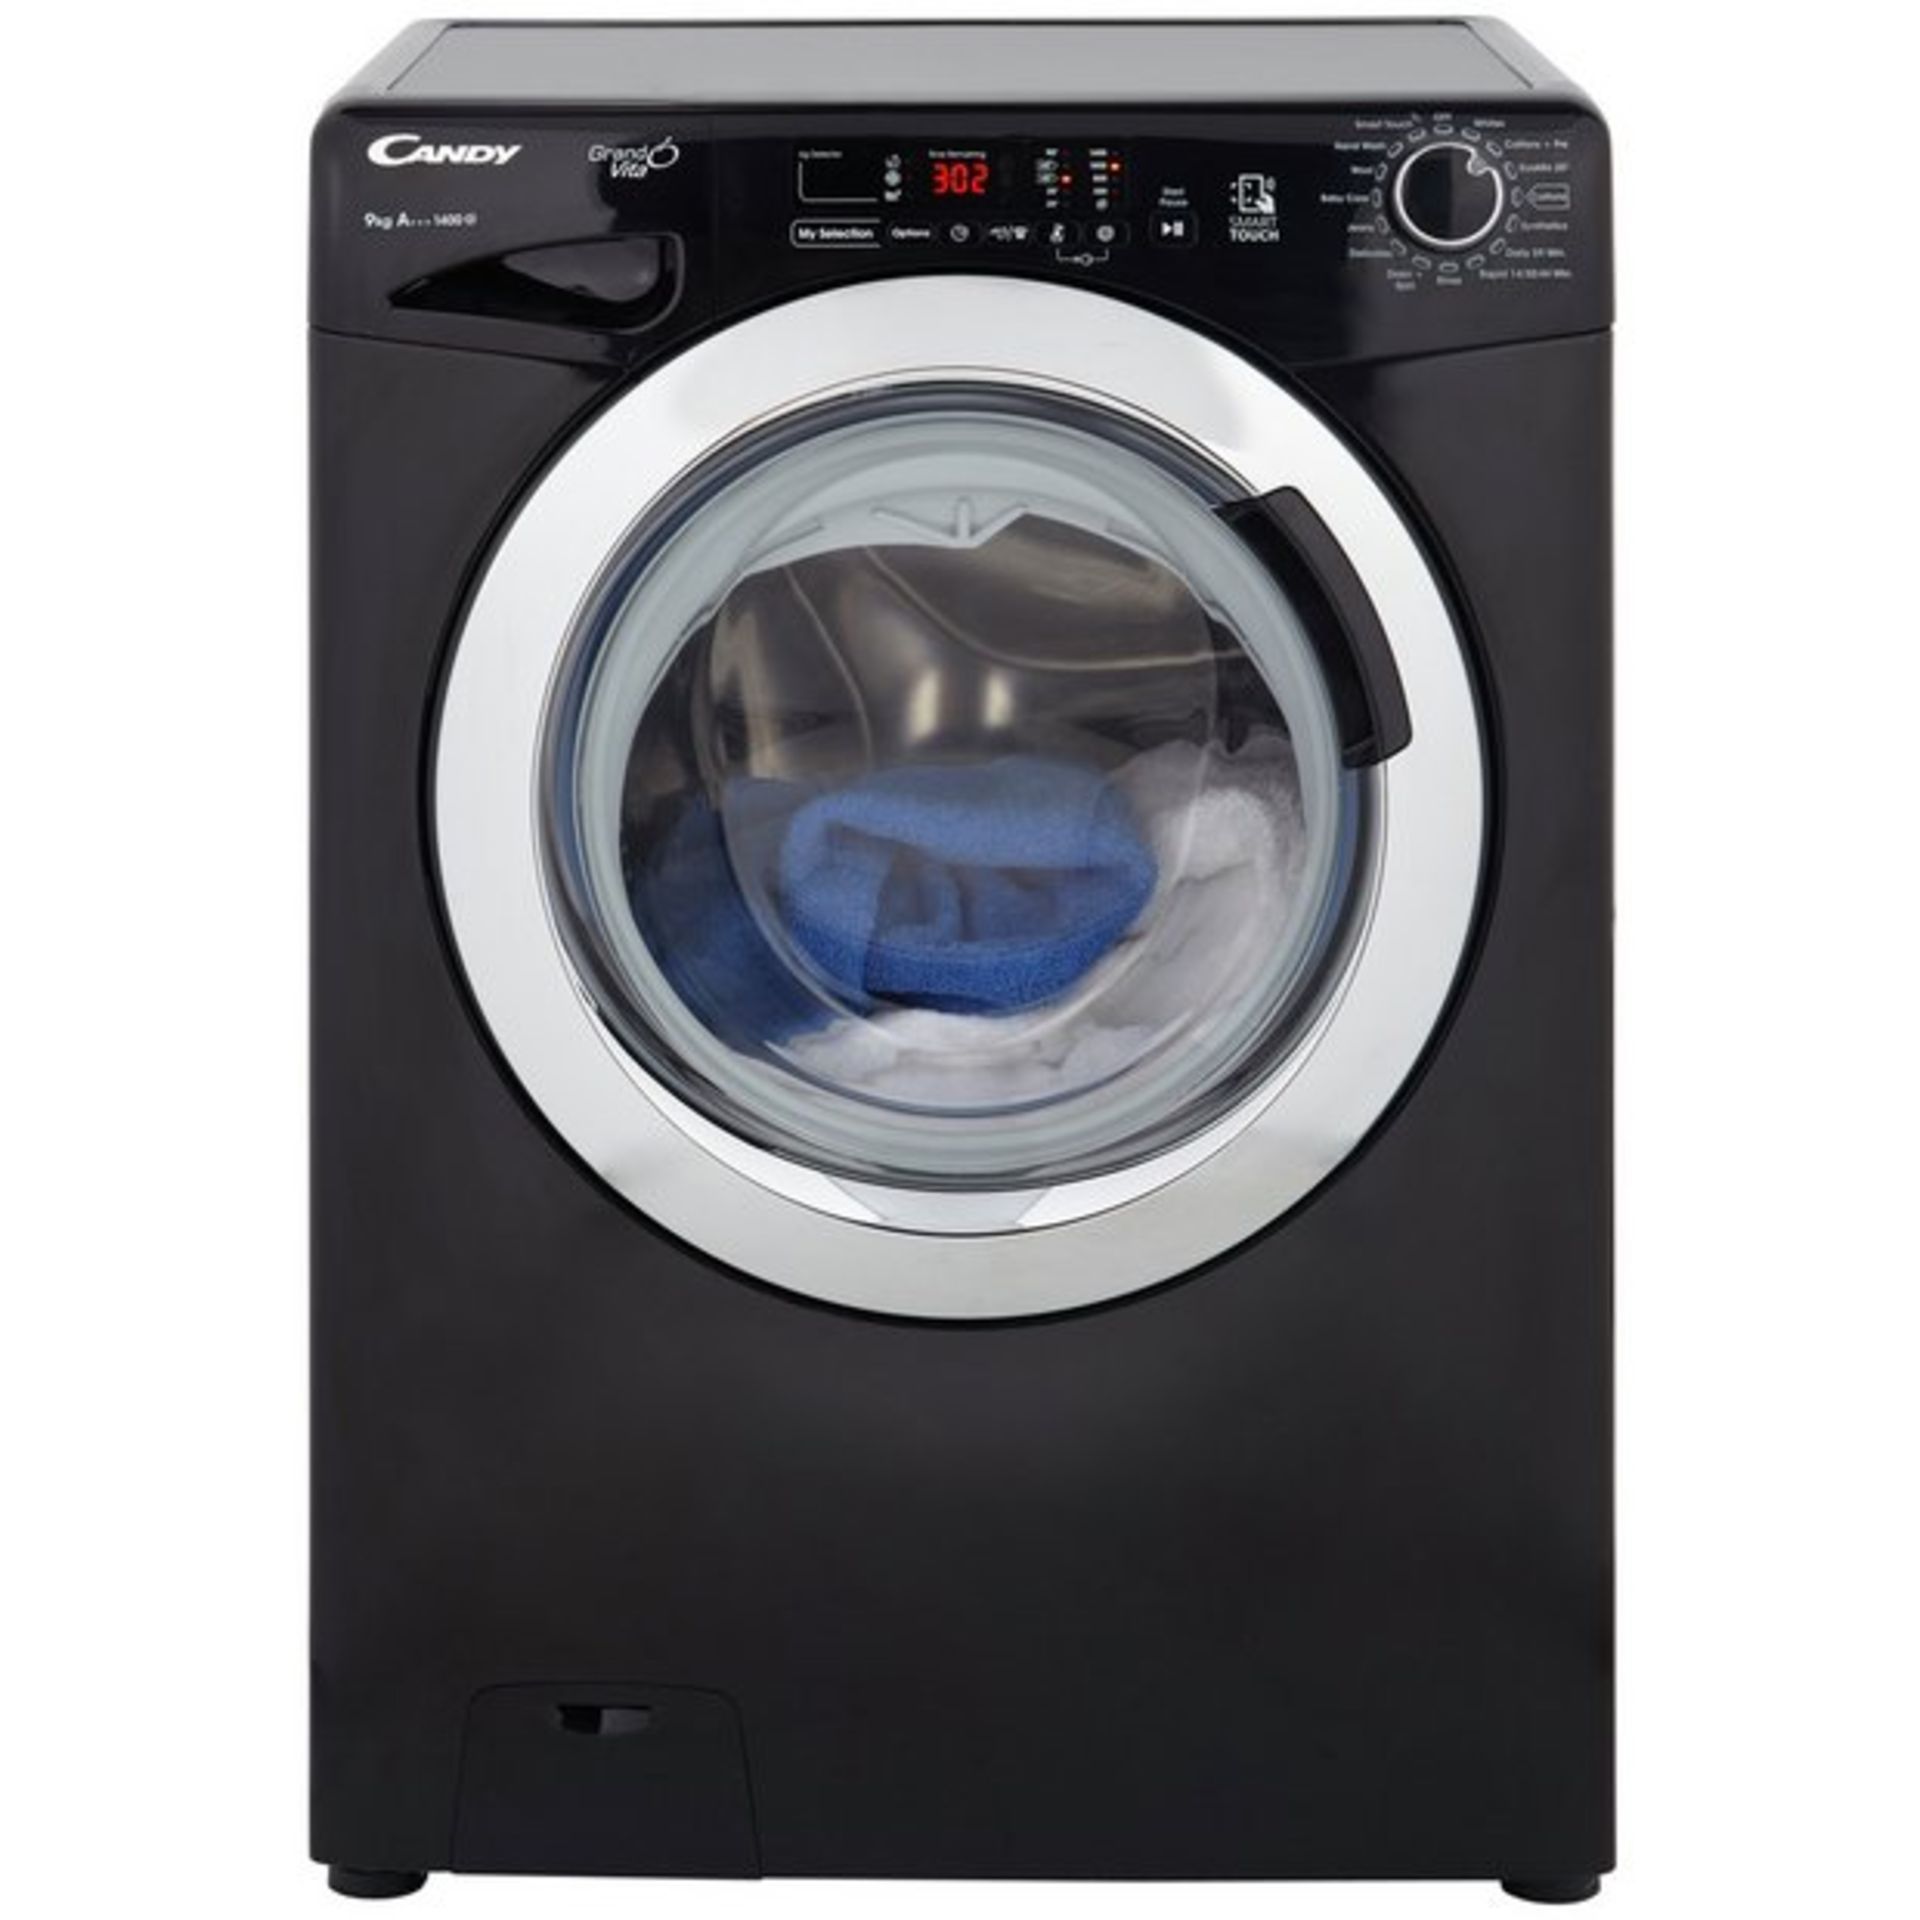 + VAT Grade A/B Candy GVS149DC3B 9Kg 1400 Spin Washing Machine - A+++ Energy Rating - 14 Minute